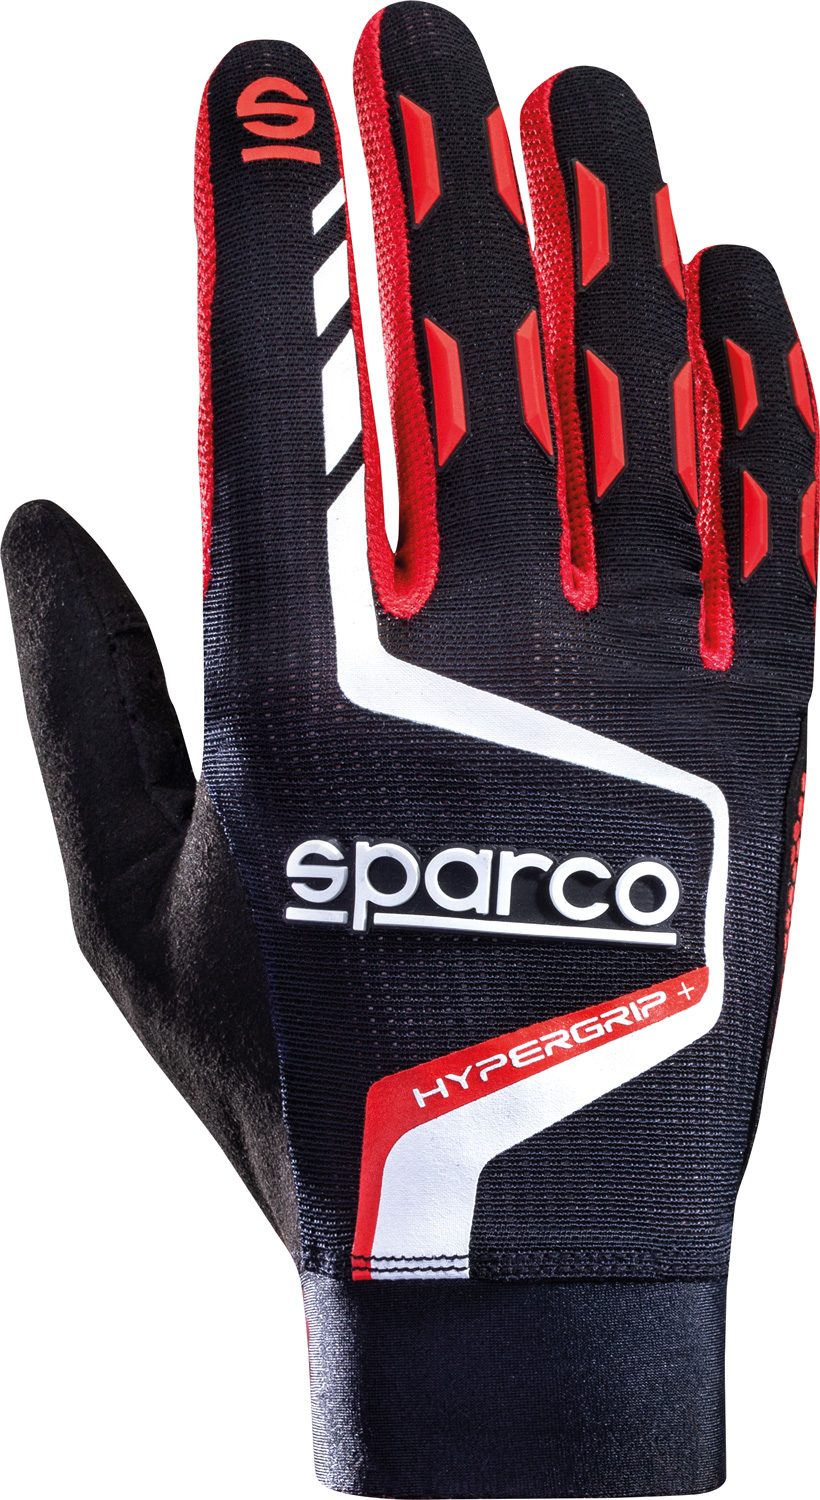 Sparco Hypergrip+ gloves red